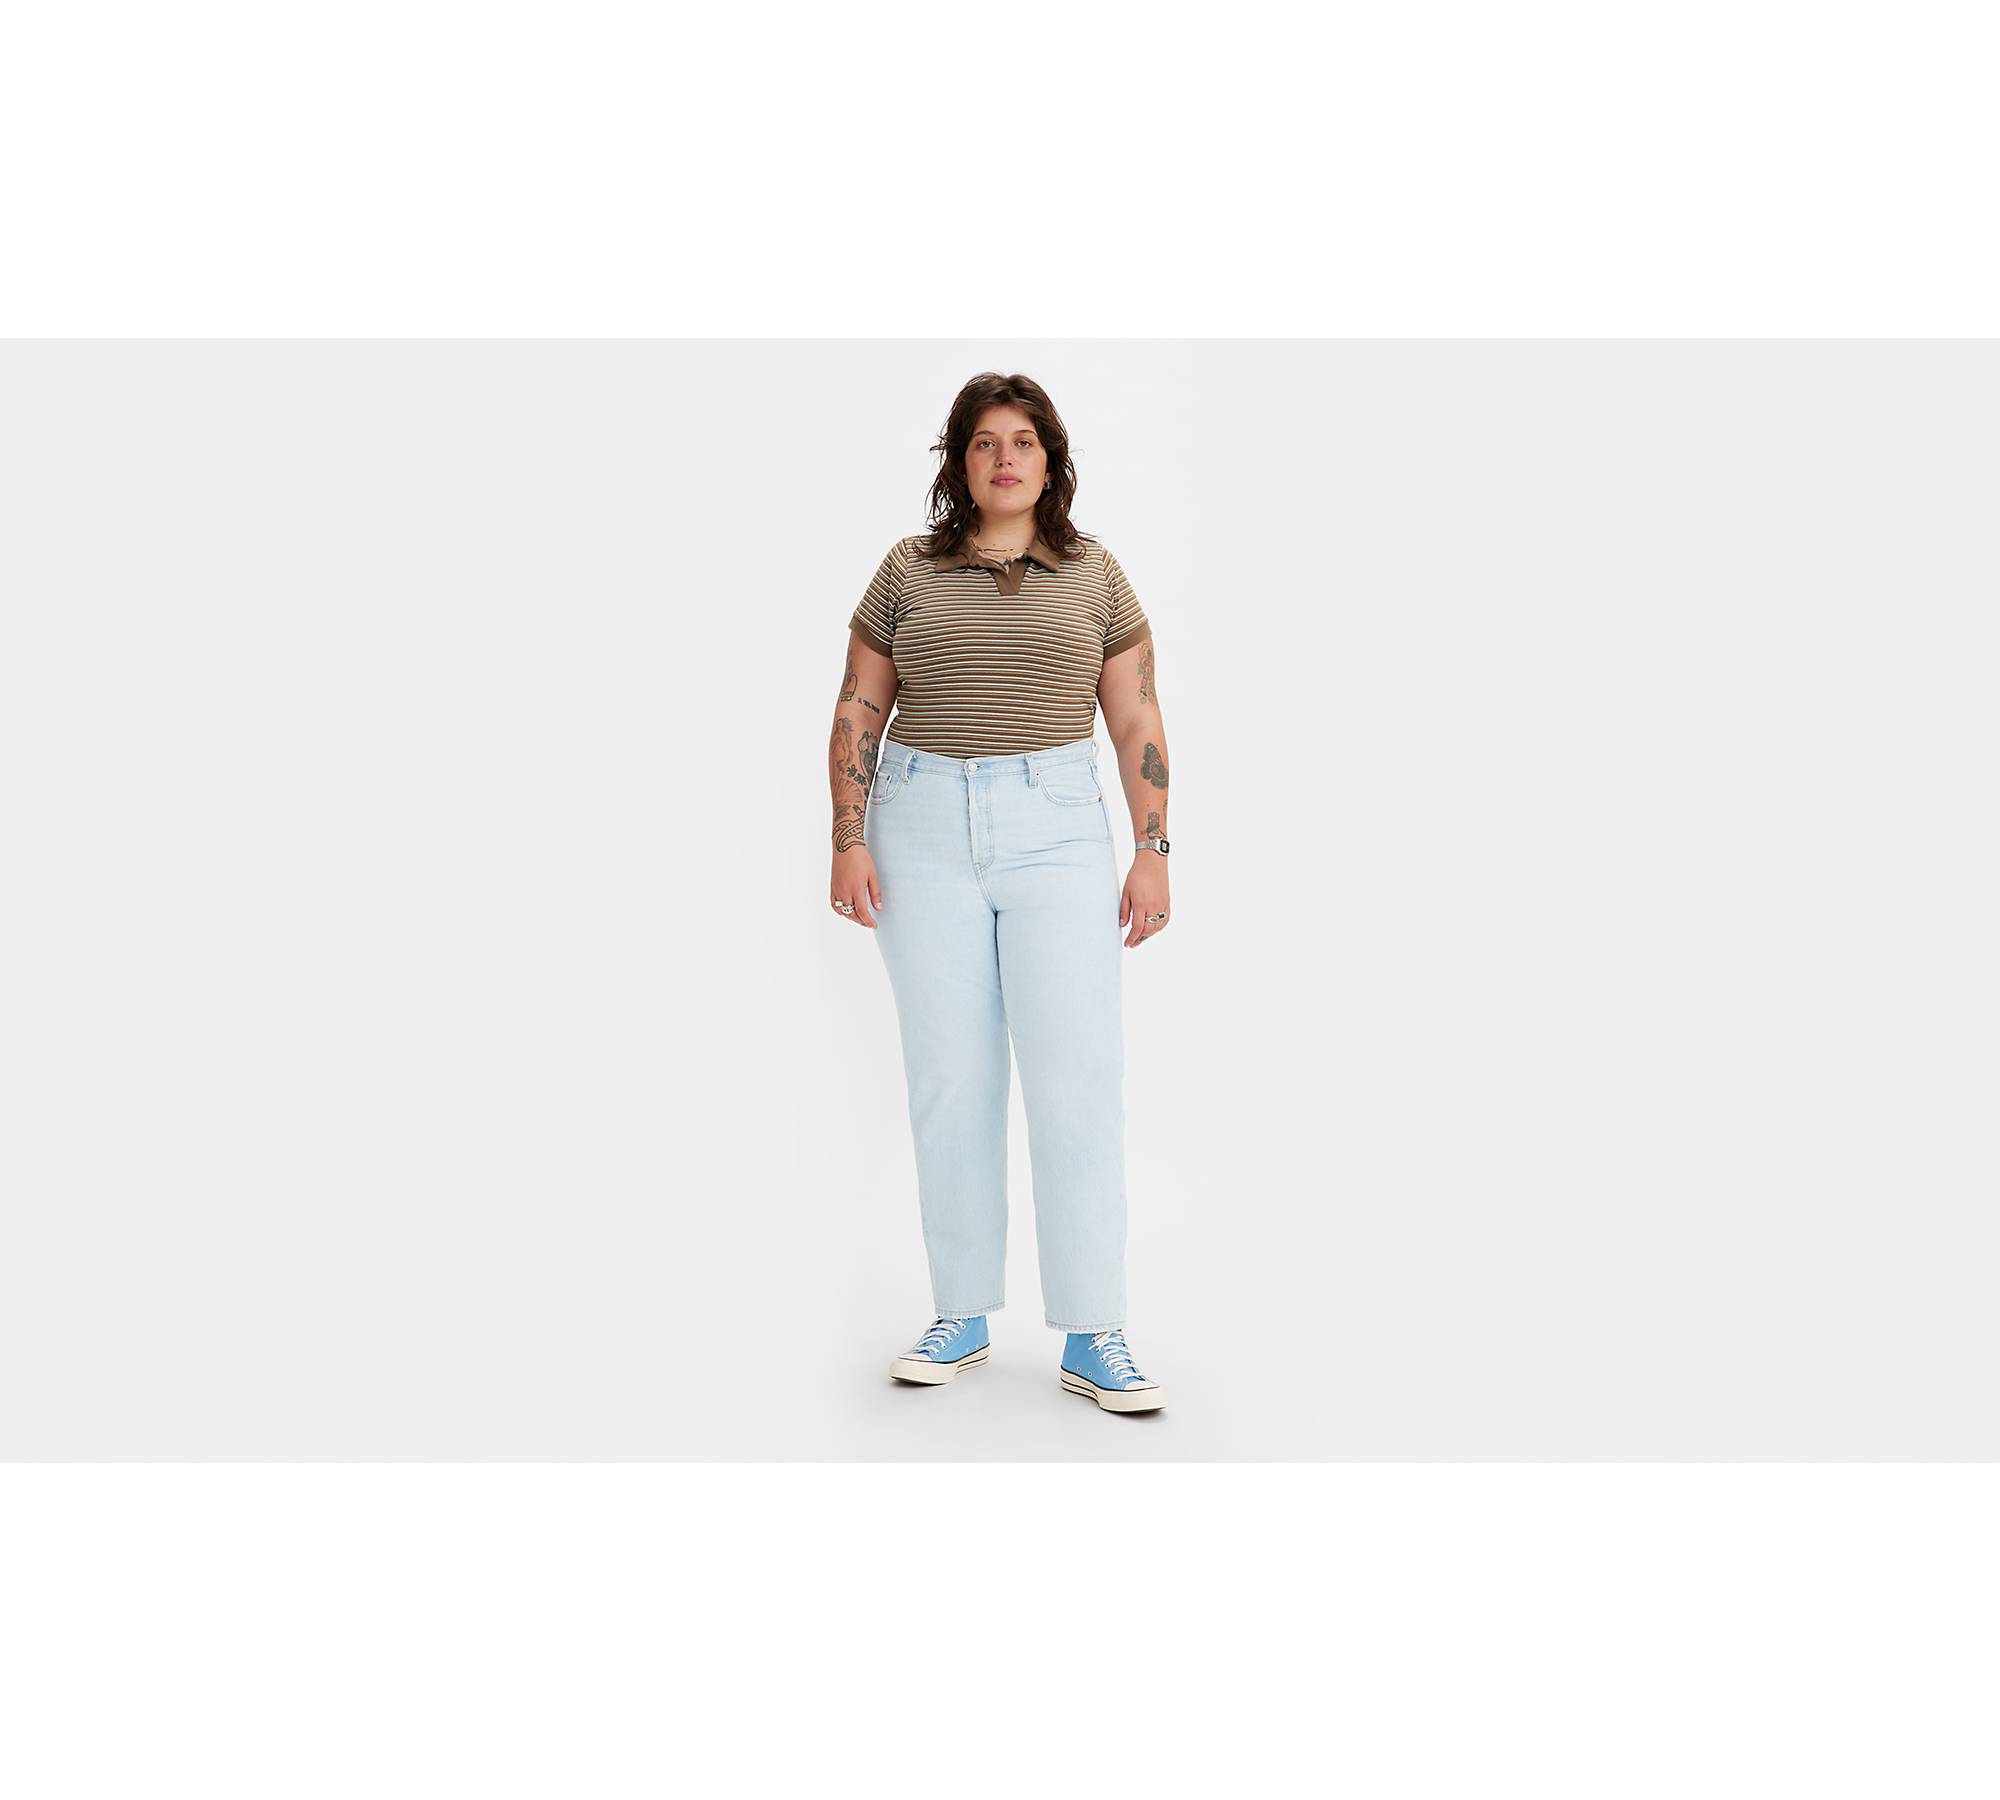 High Waisted Mom Women's Jeans (plus Size) - Medium Wash